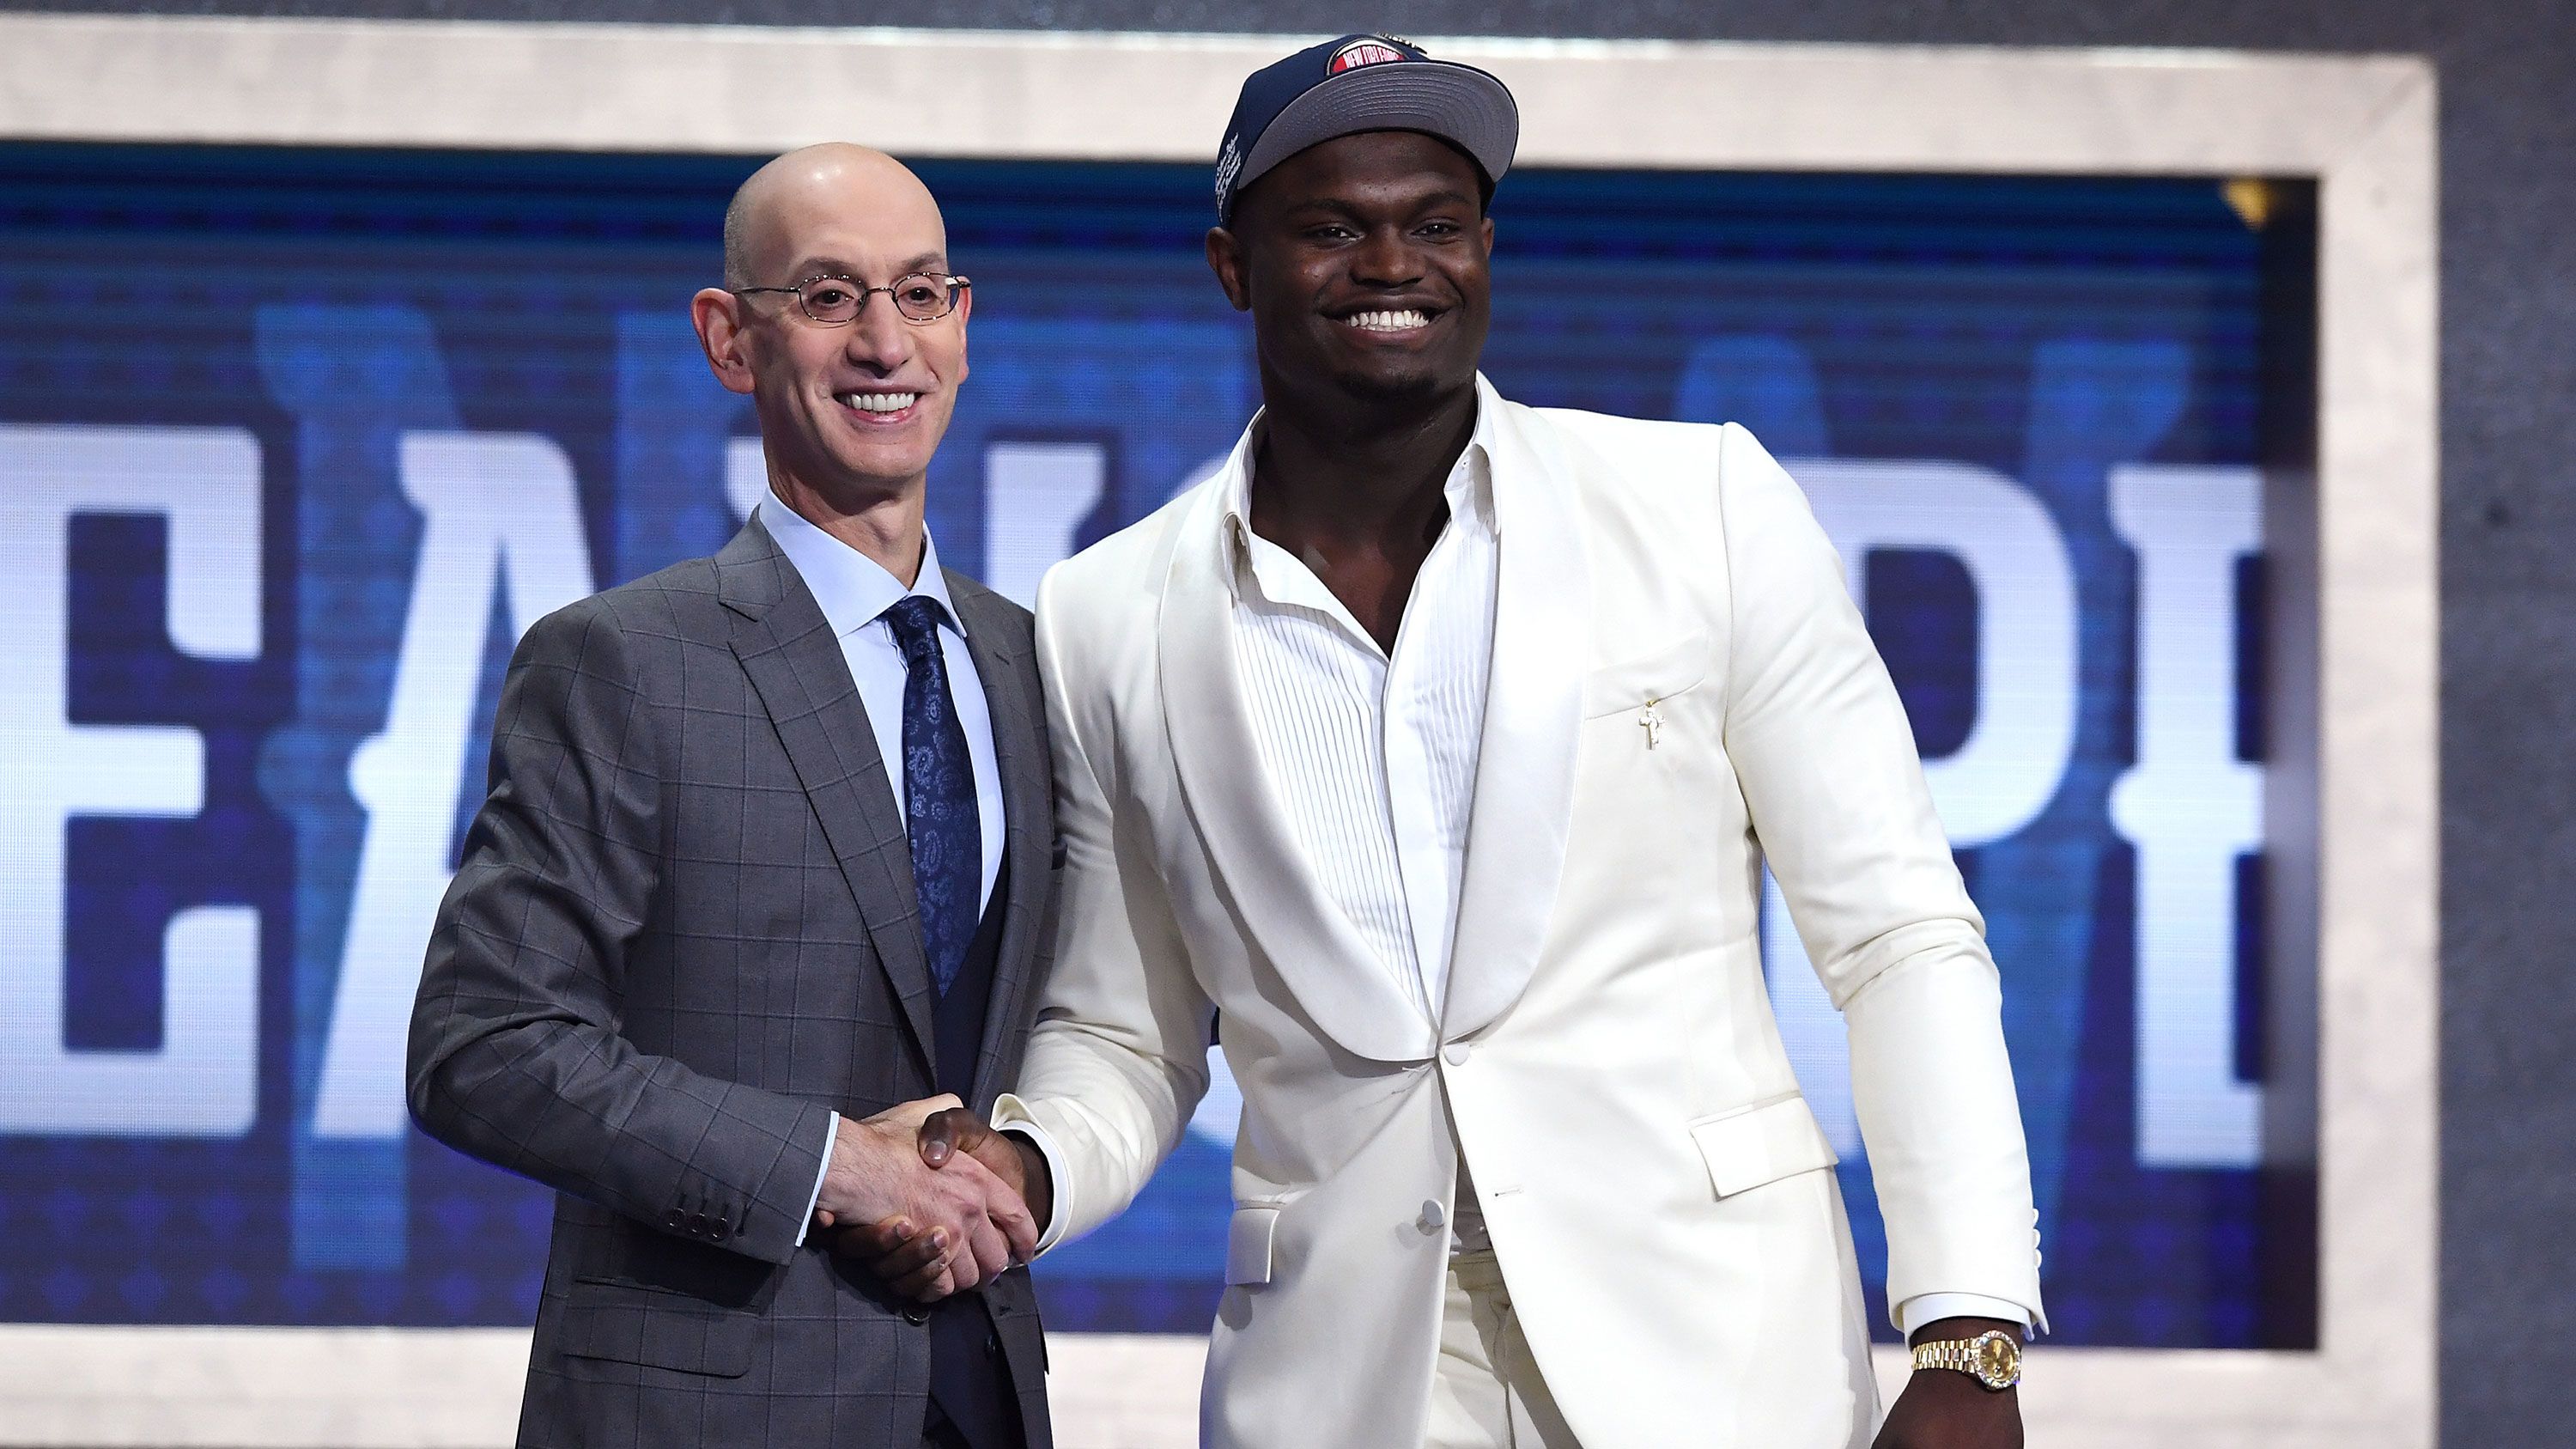 NBA draft: Zion Williamson headed to New Orleans